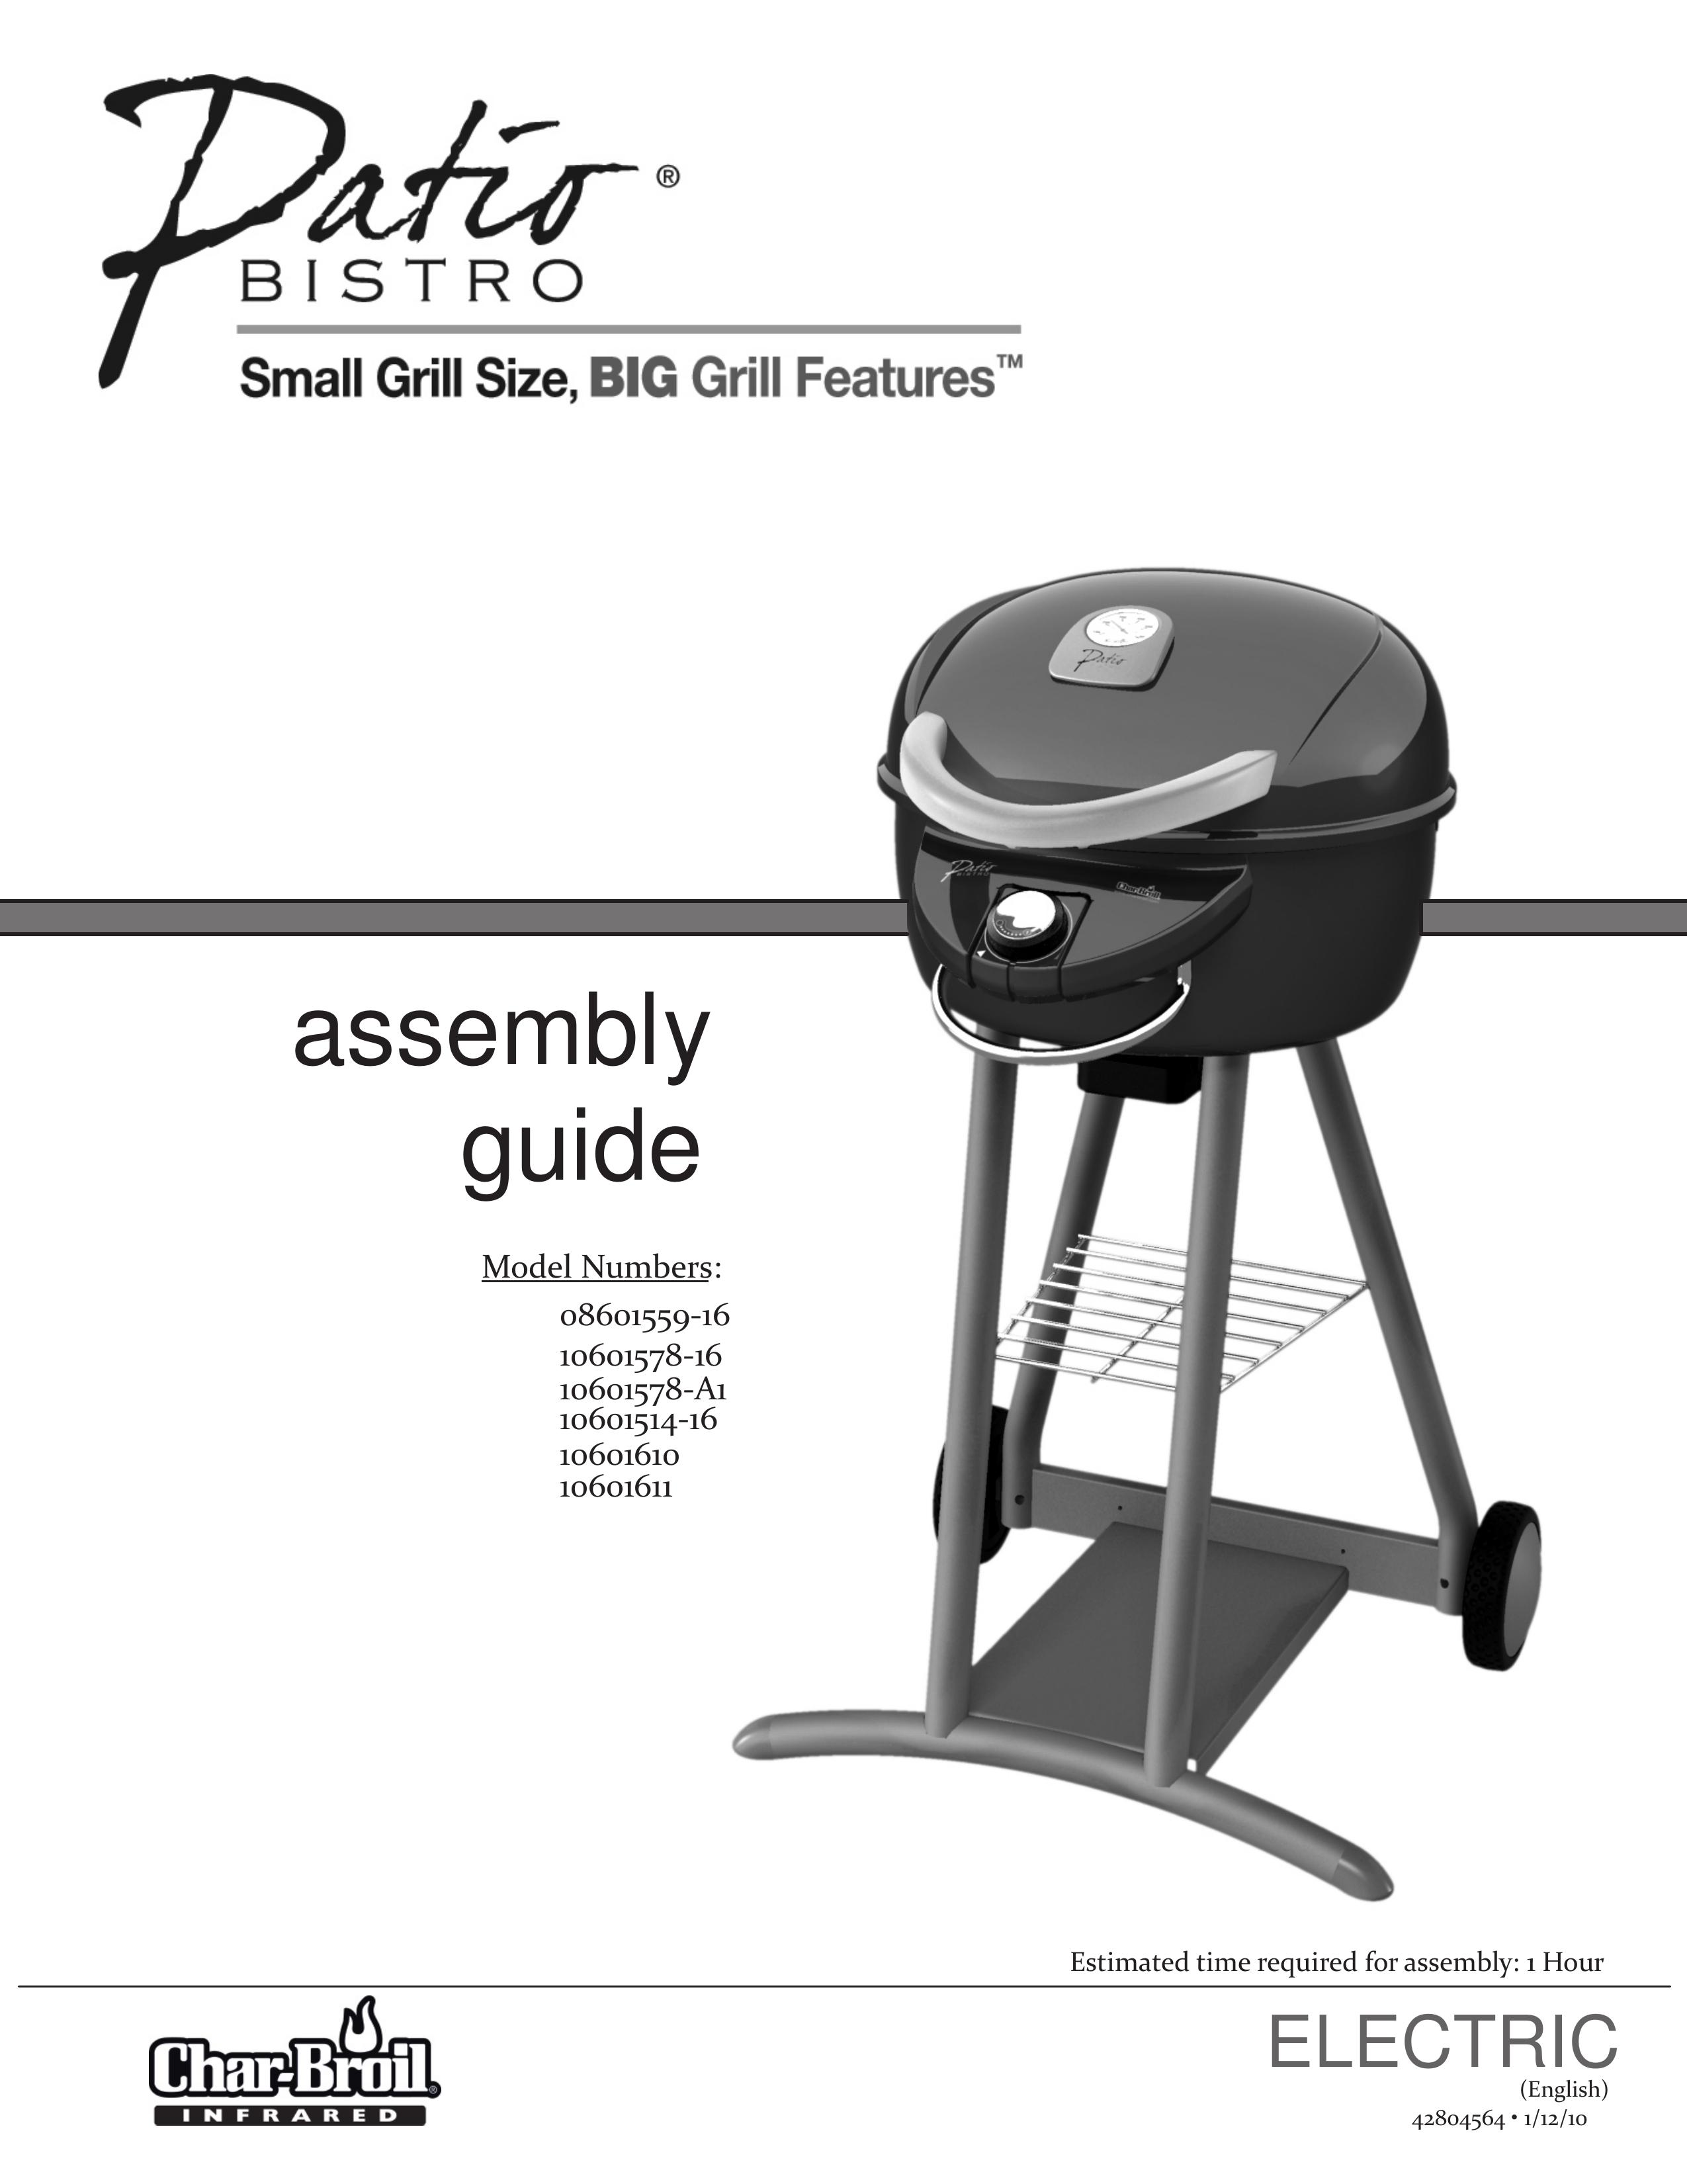 Char-Broil 10601514-16 Electric Grill User Manual